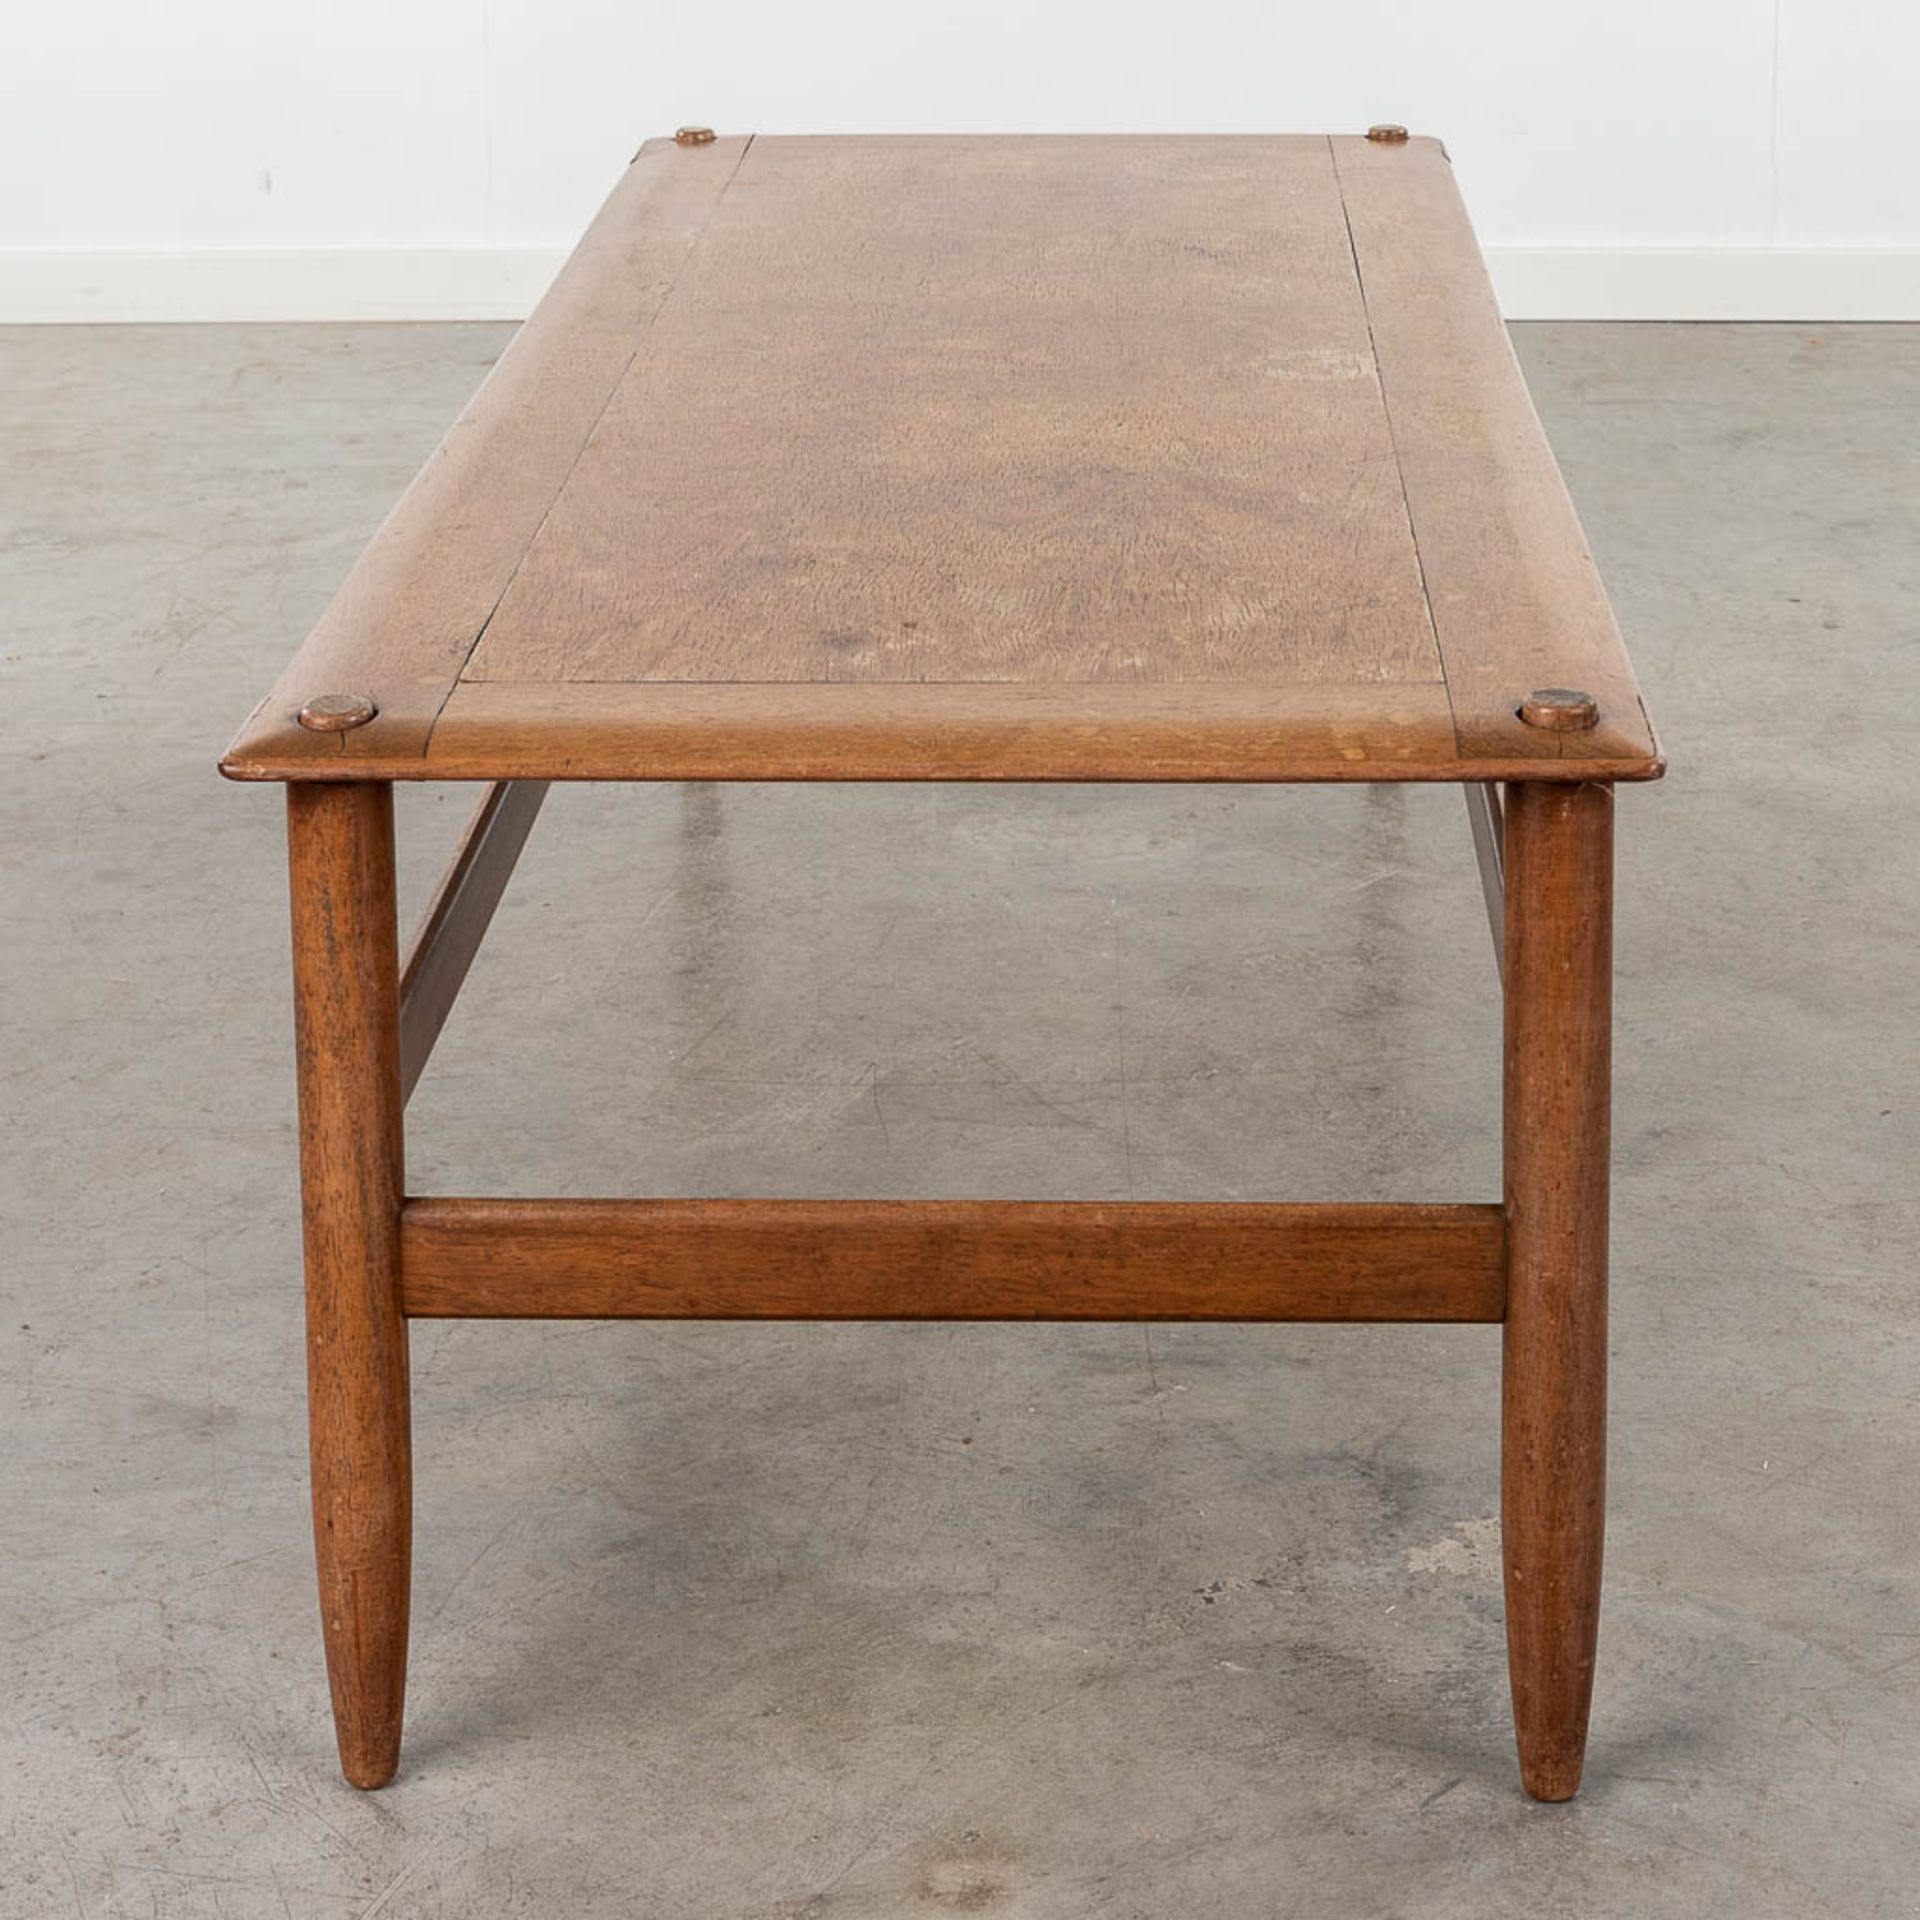 A mid-century coffee table with a reversible top, teak. Circa 1960. (L: 42 x W: 40 x H: 125 cm) - Image 4 of 15